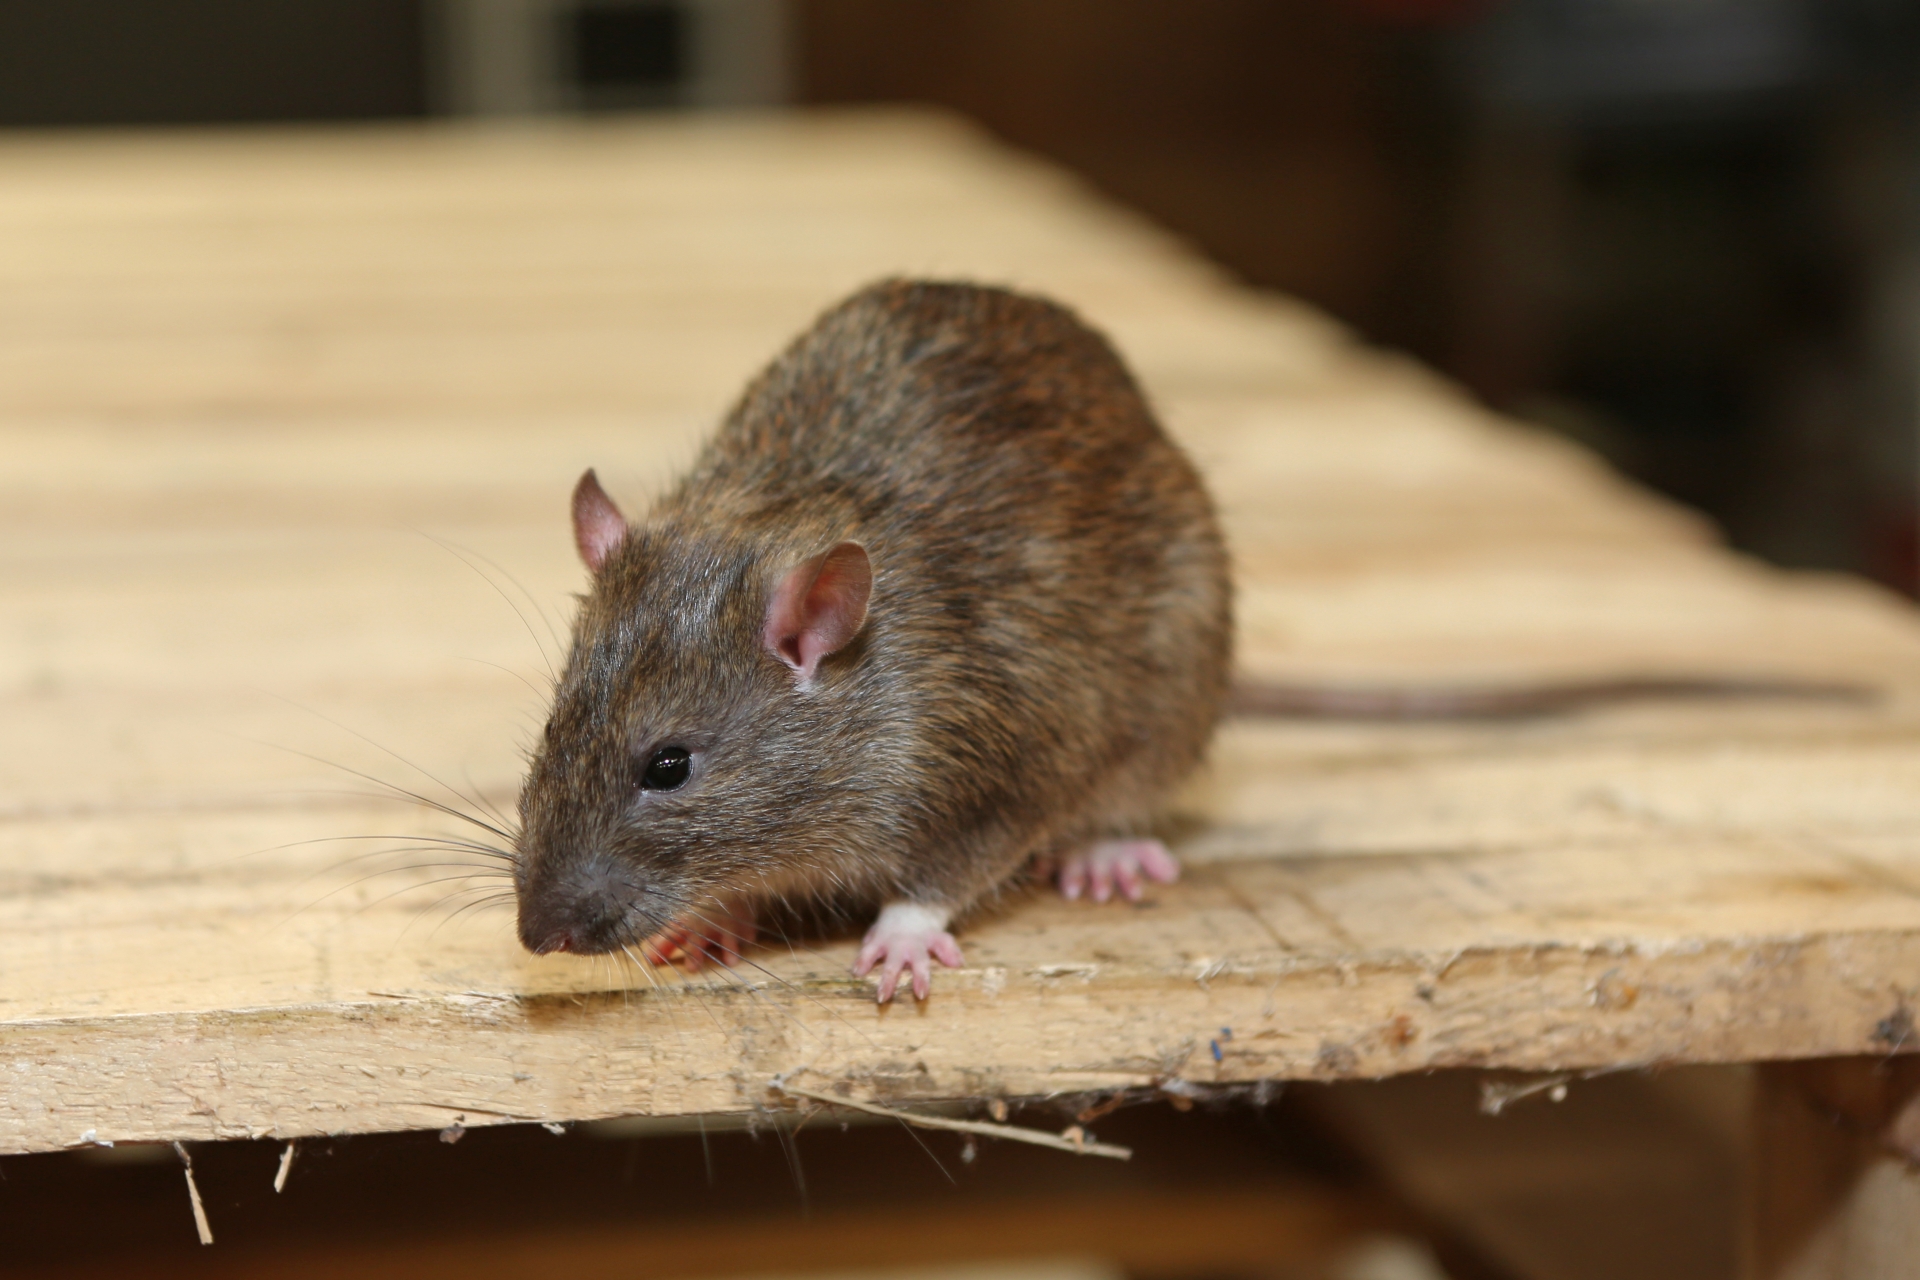 Rat Control, Pest Control in South Lambeth, SW8. Call Now 020 8166 9746